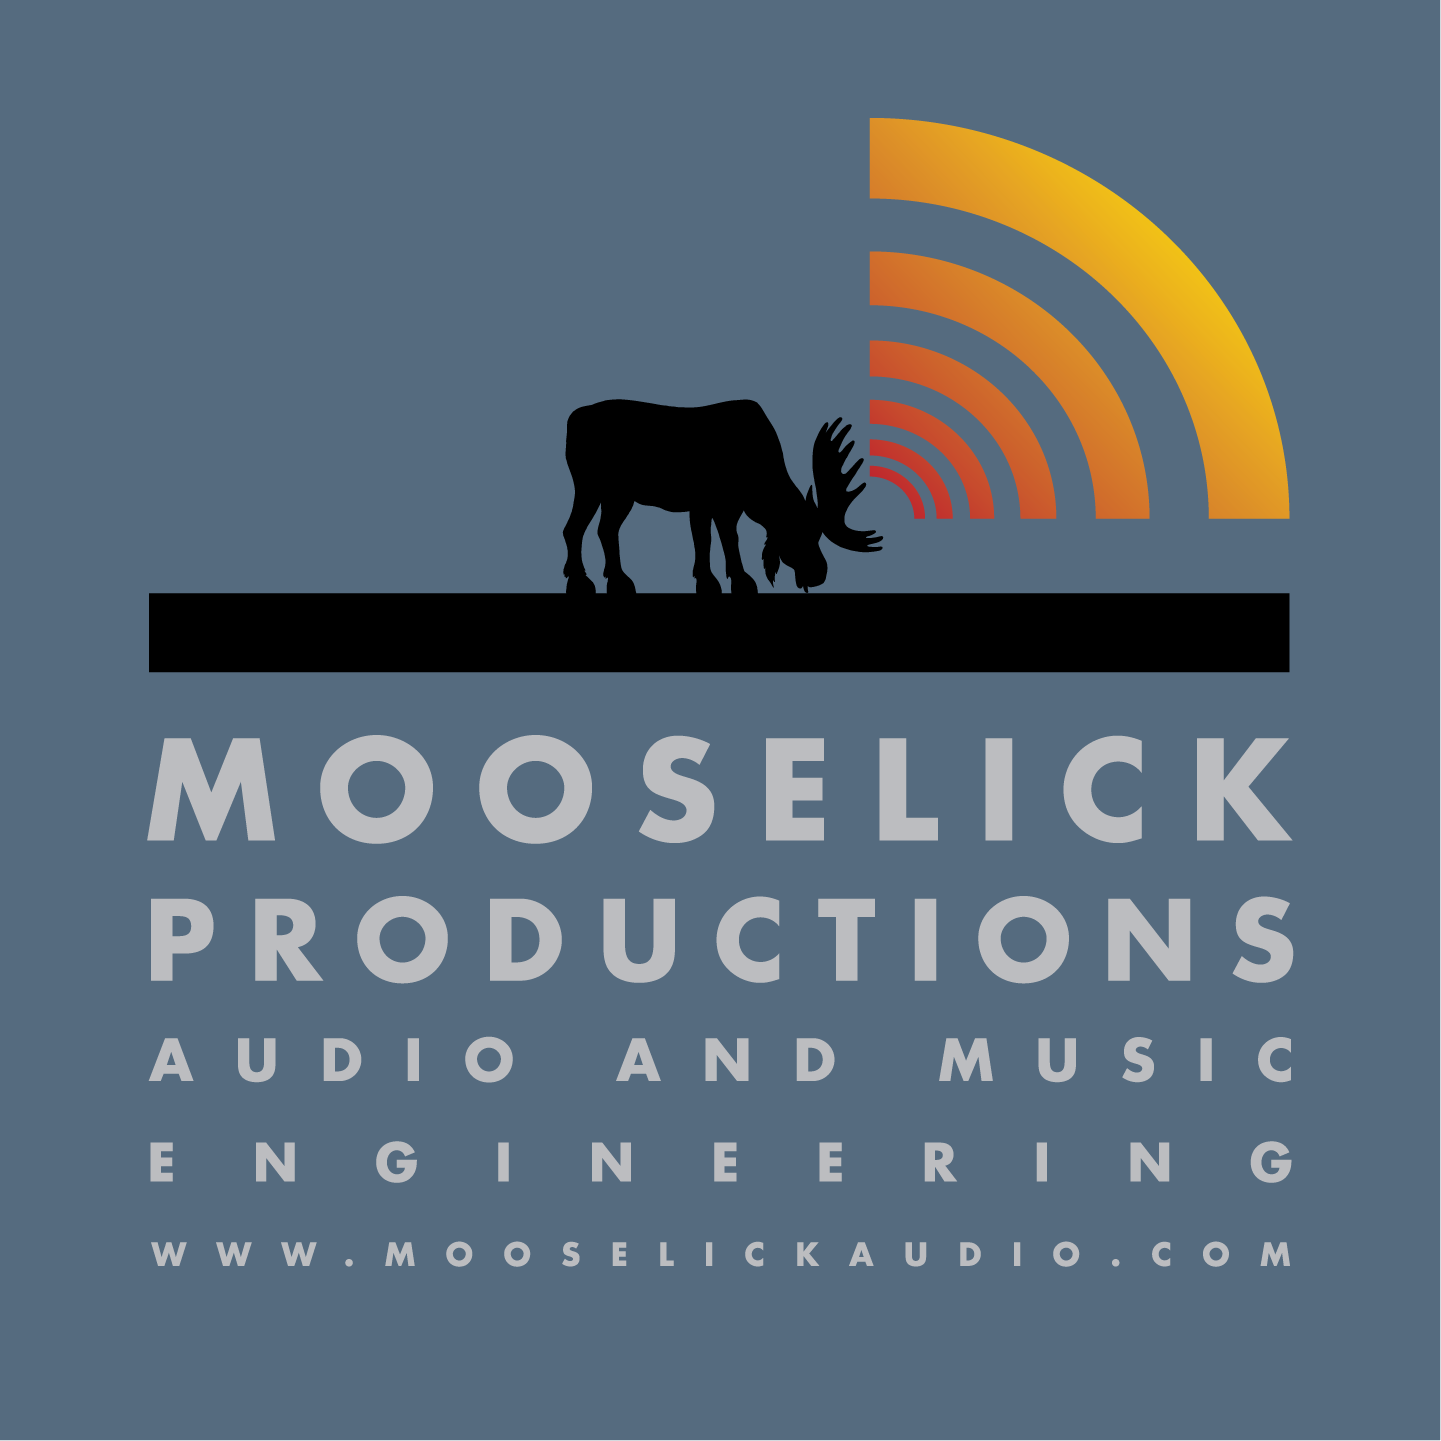 Logo Design&lt; Mooselick Productions Audio and Music Engineering